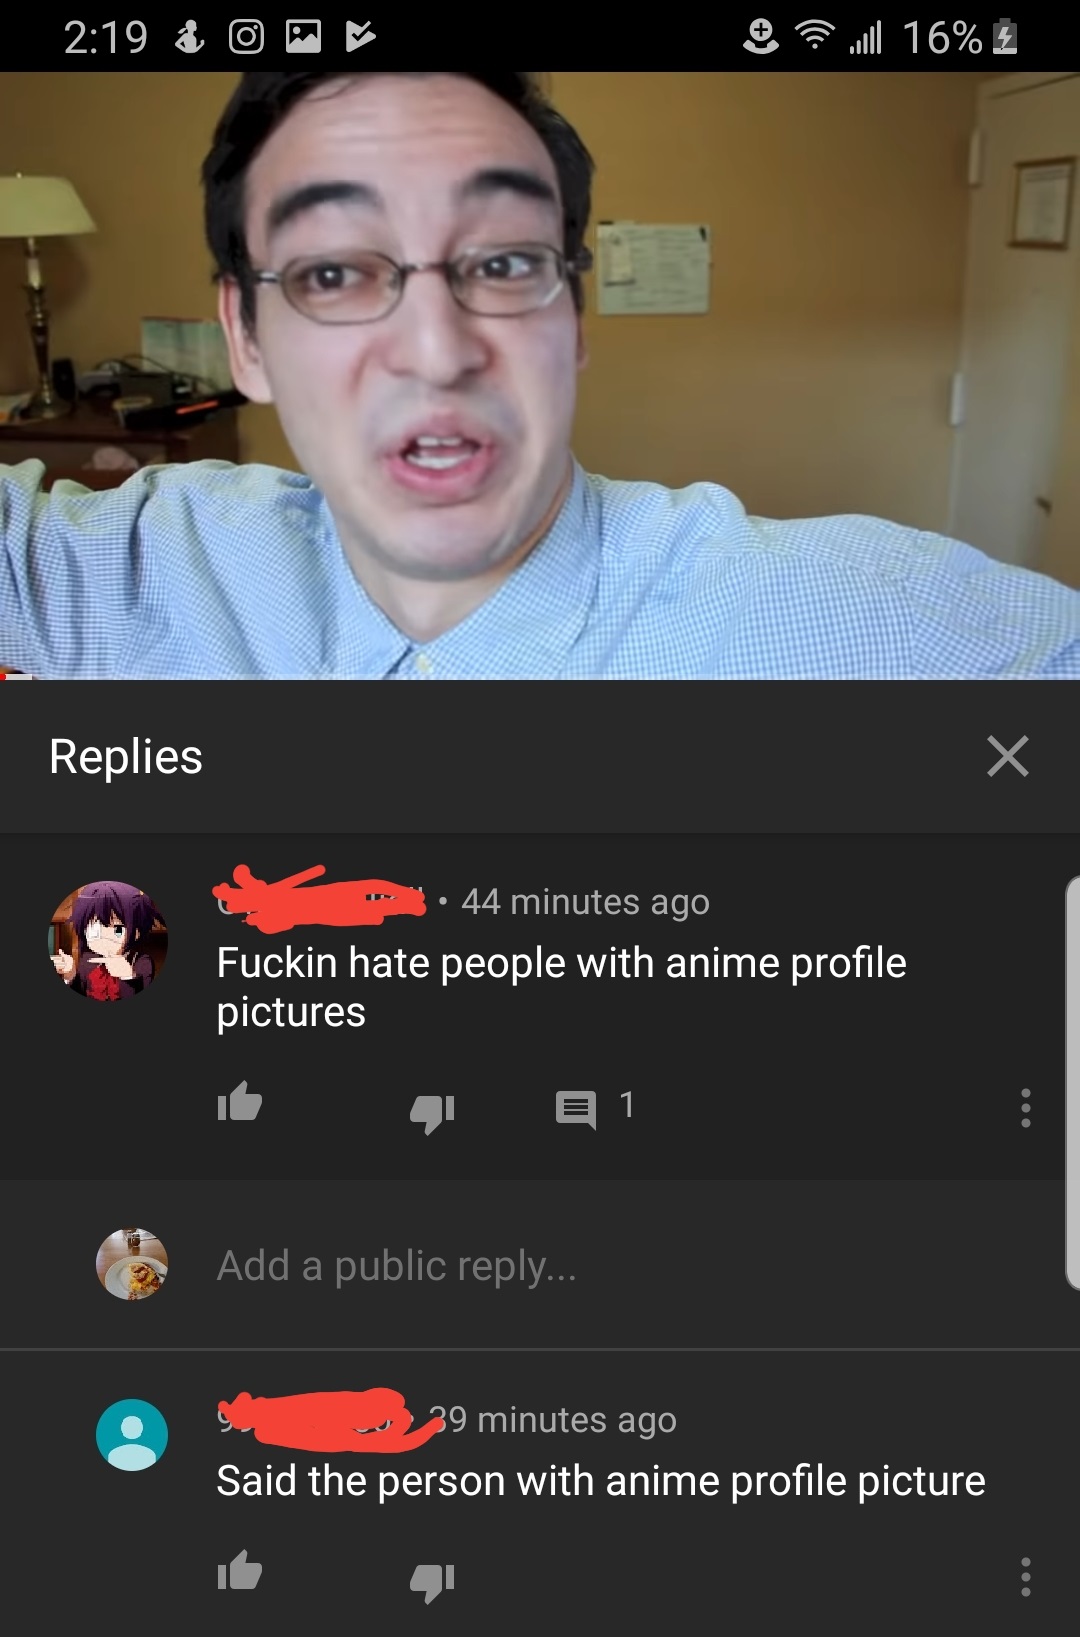 screenshot - & O e l 16% Replies _ X 44 minutes ago Fuckin hate people with anime profile pictures 421 Add a public ... 39 minutes ago Said the person with anime profile picture